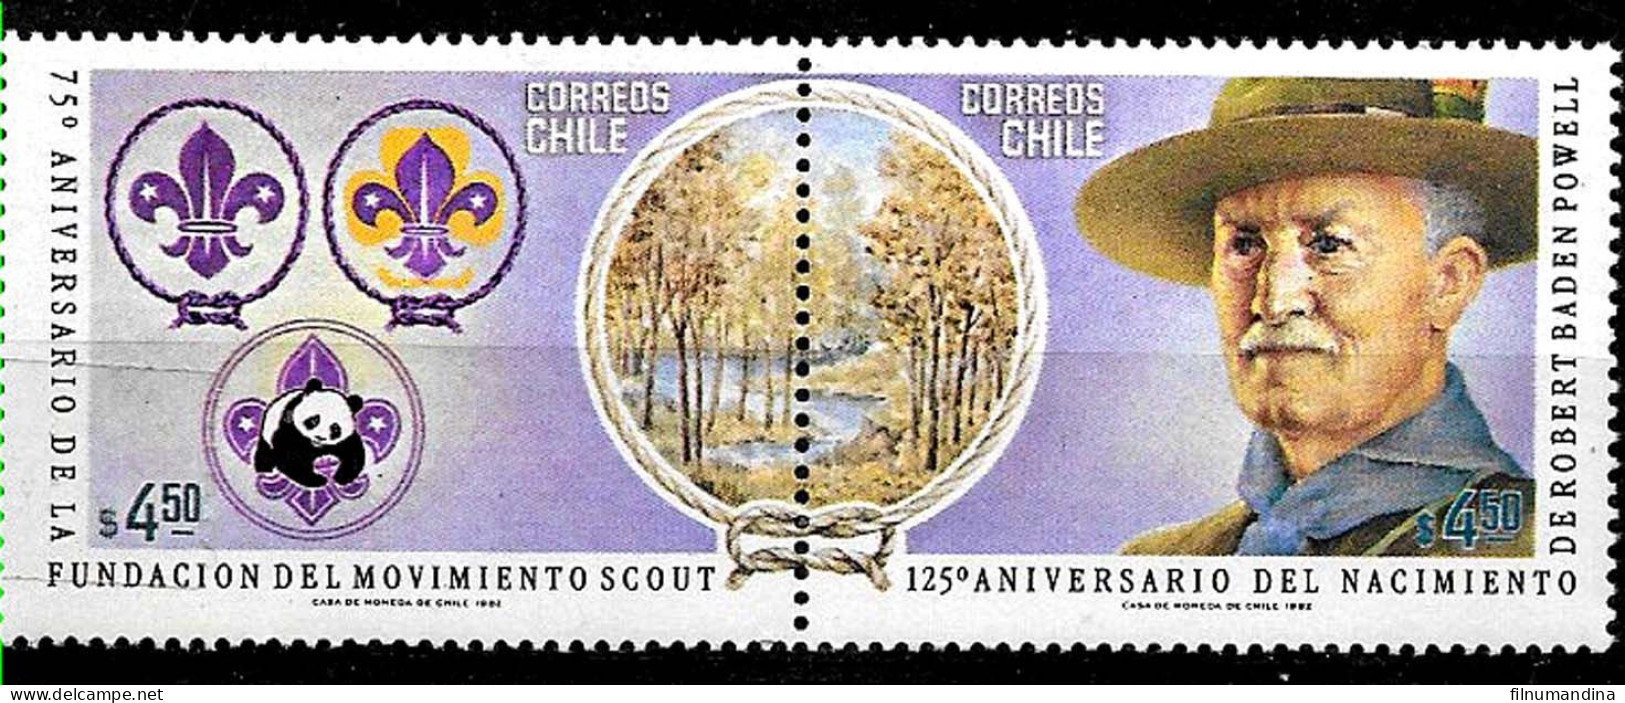 #2595 CHILE 1982 SCOUTS SCOUTISM BADEN POWELL YV 597-8 MNH - Chile